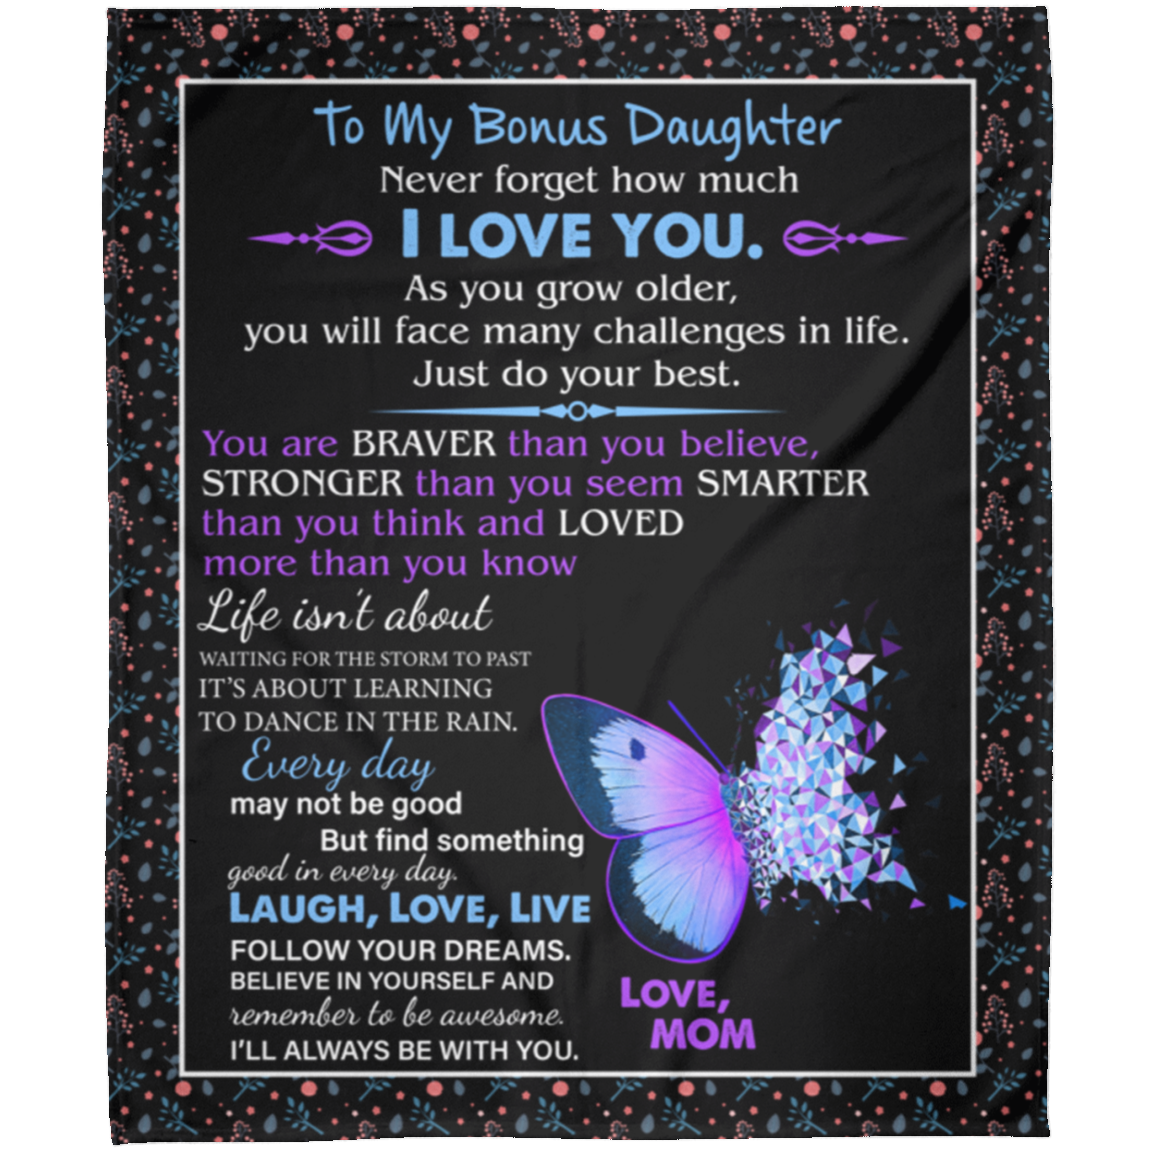 To My Bonus Daughter | Never forget how much I LOVE YOU | Arctic Fleece Blanket 50x60